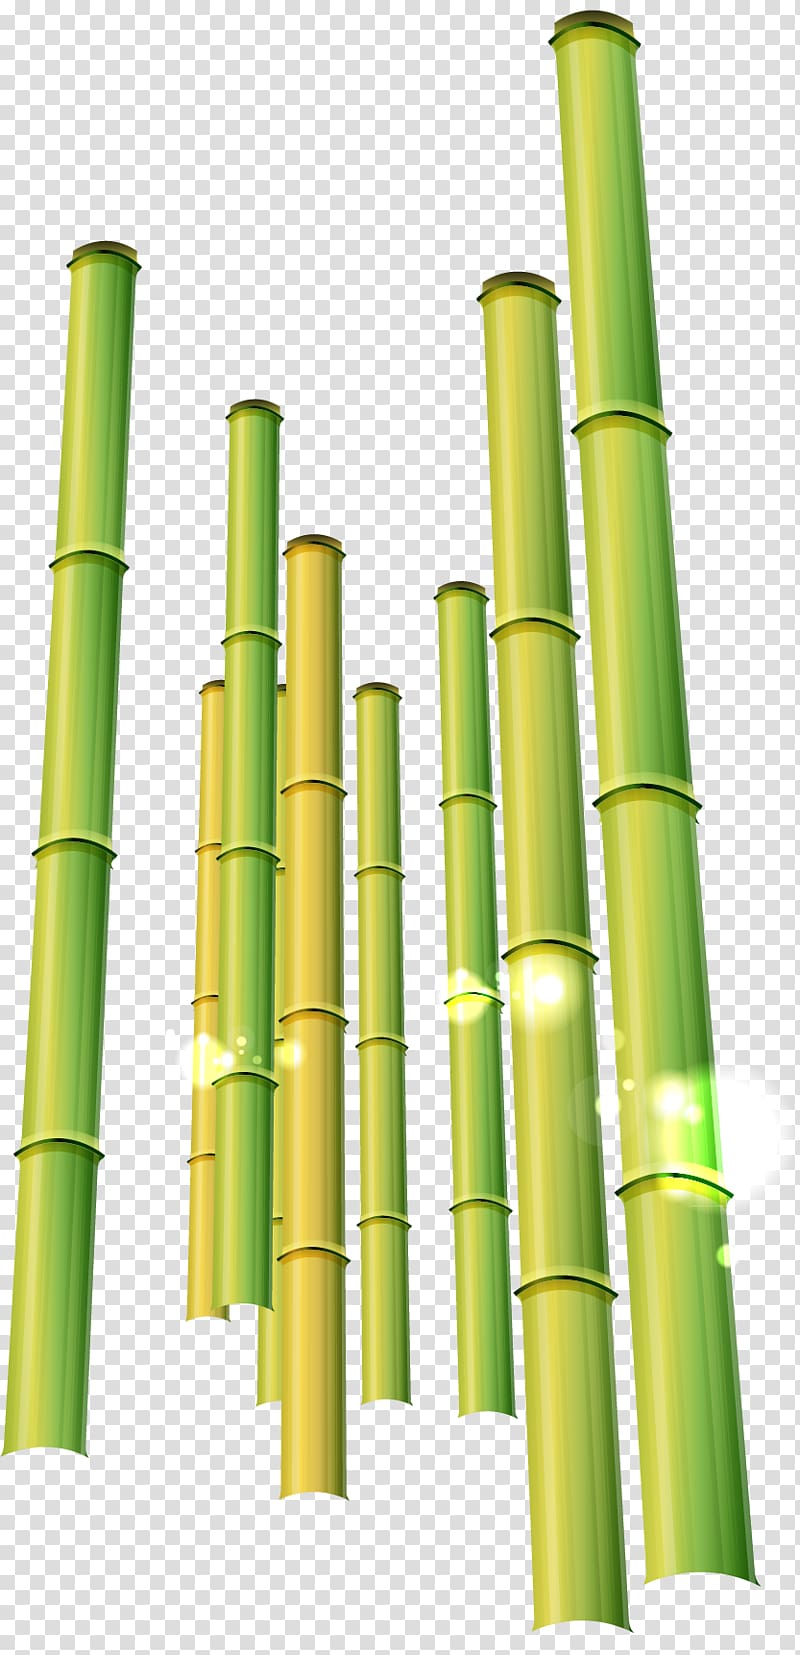 Bamboo , Green bamboo pattern material transparent background PNG clipart